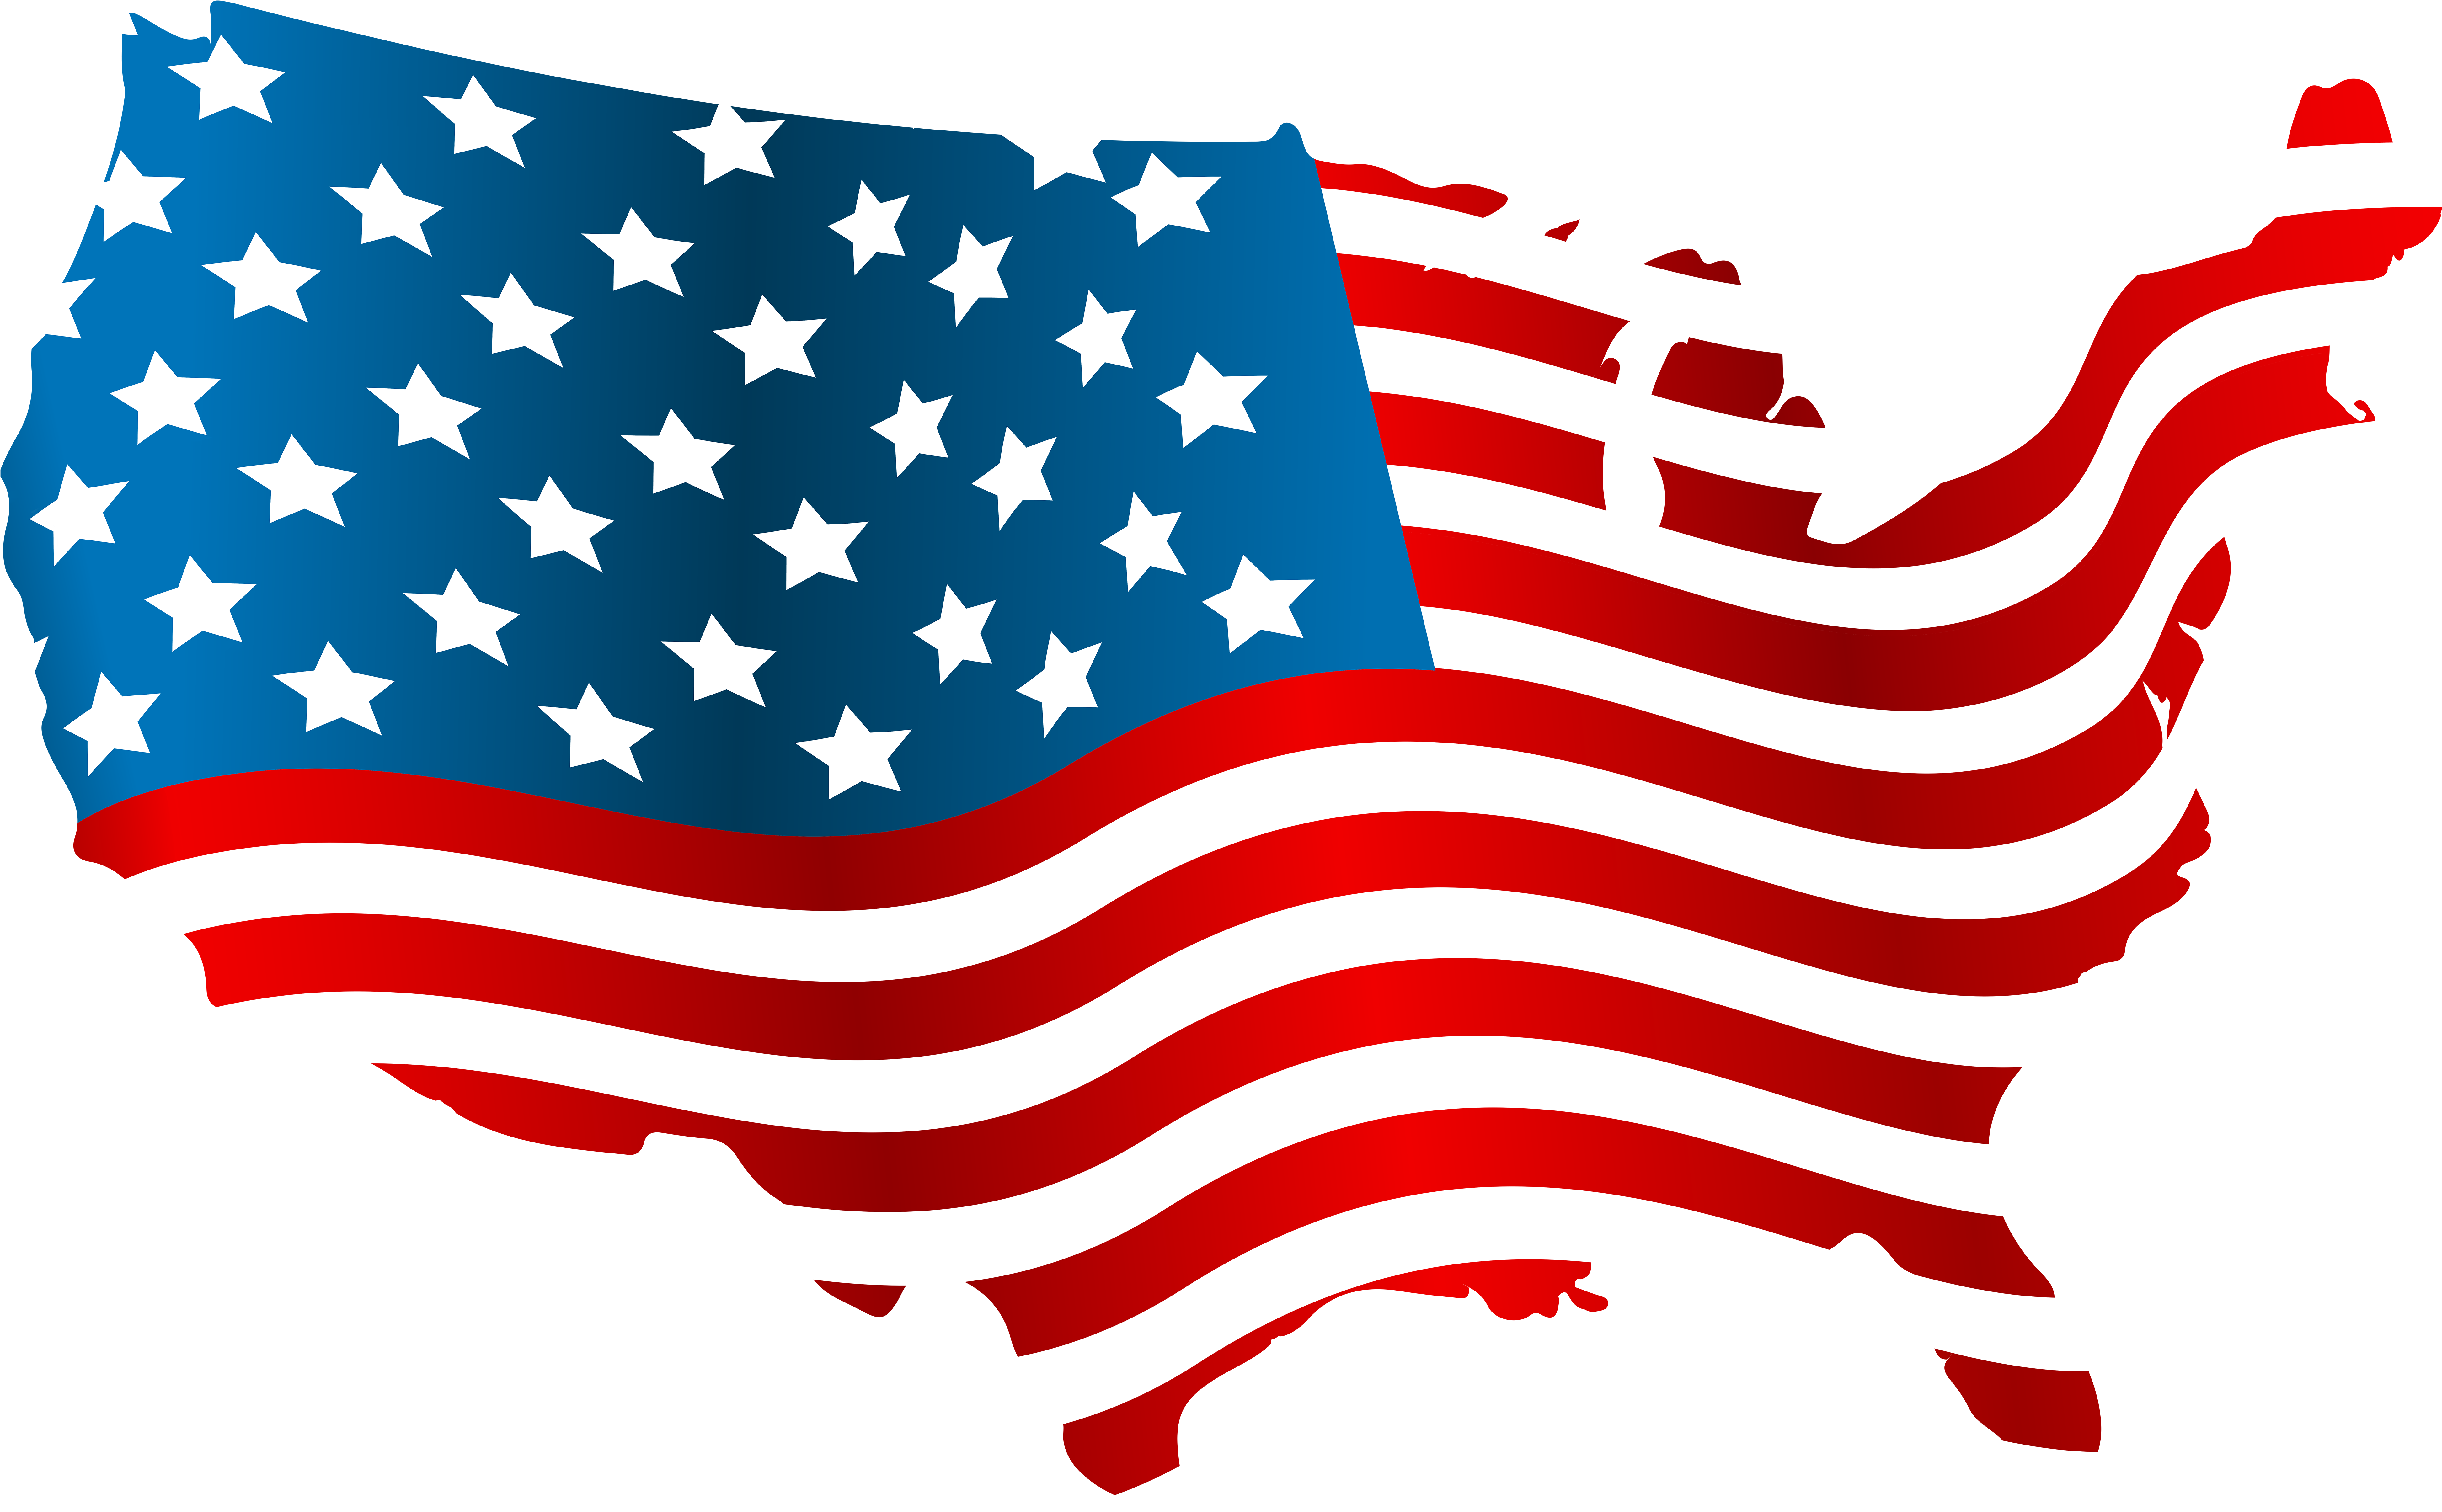 Patriotic clipart history us. Motorcycle transparent background usa